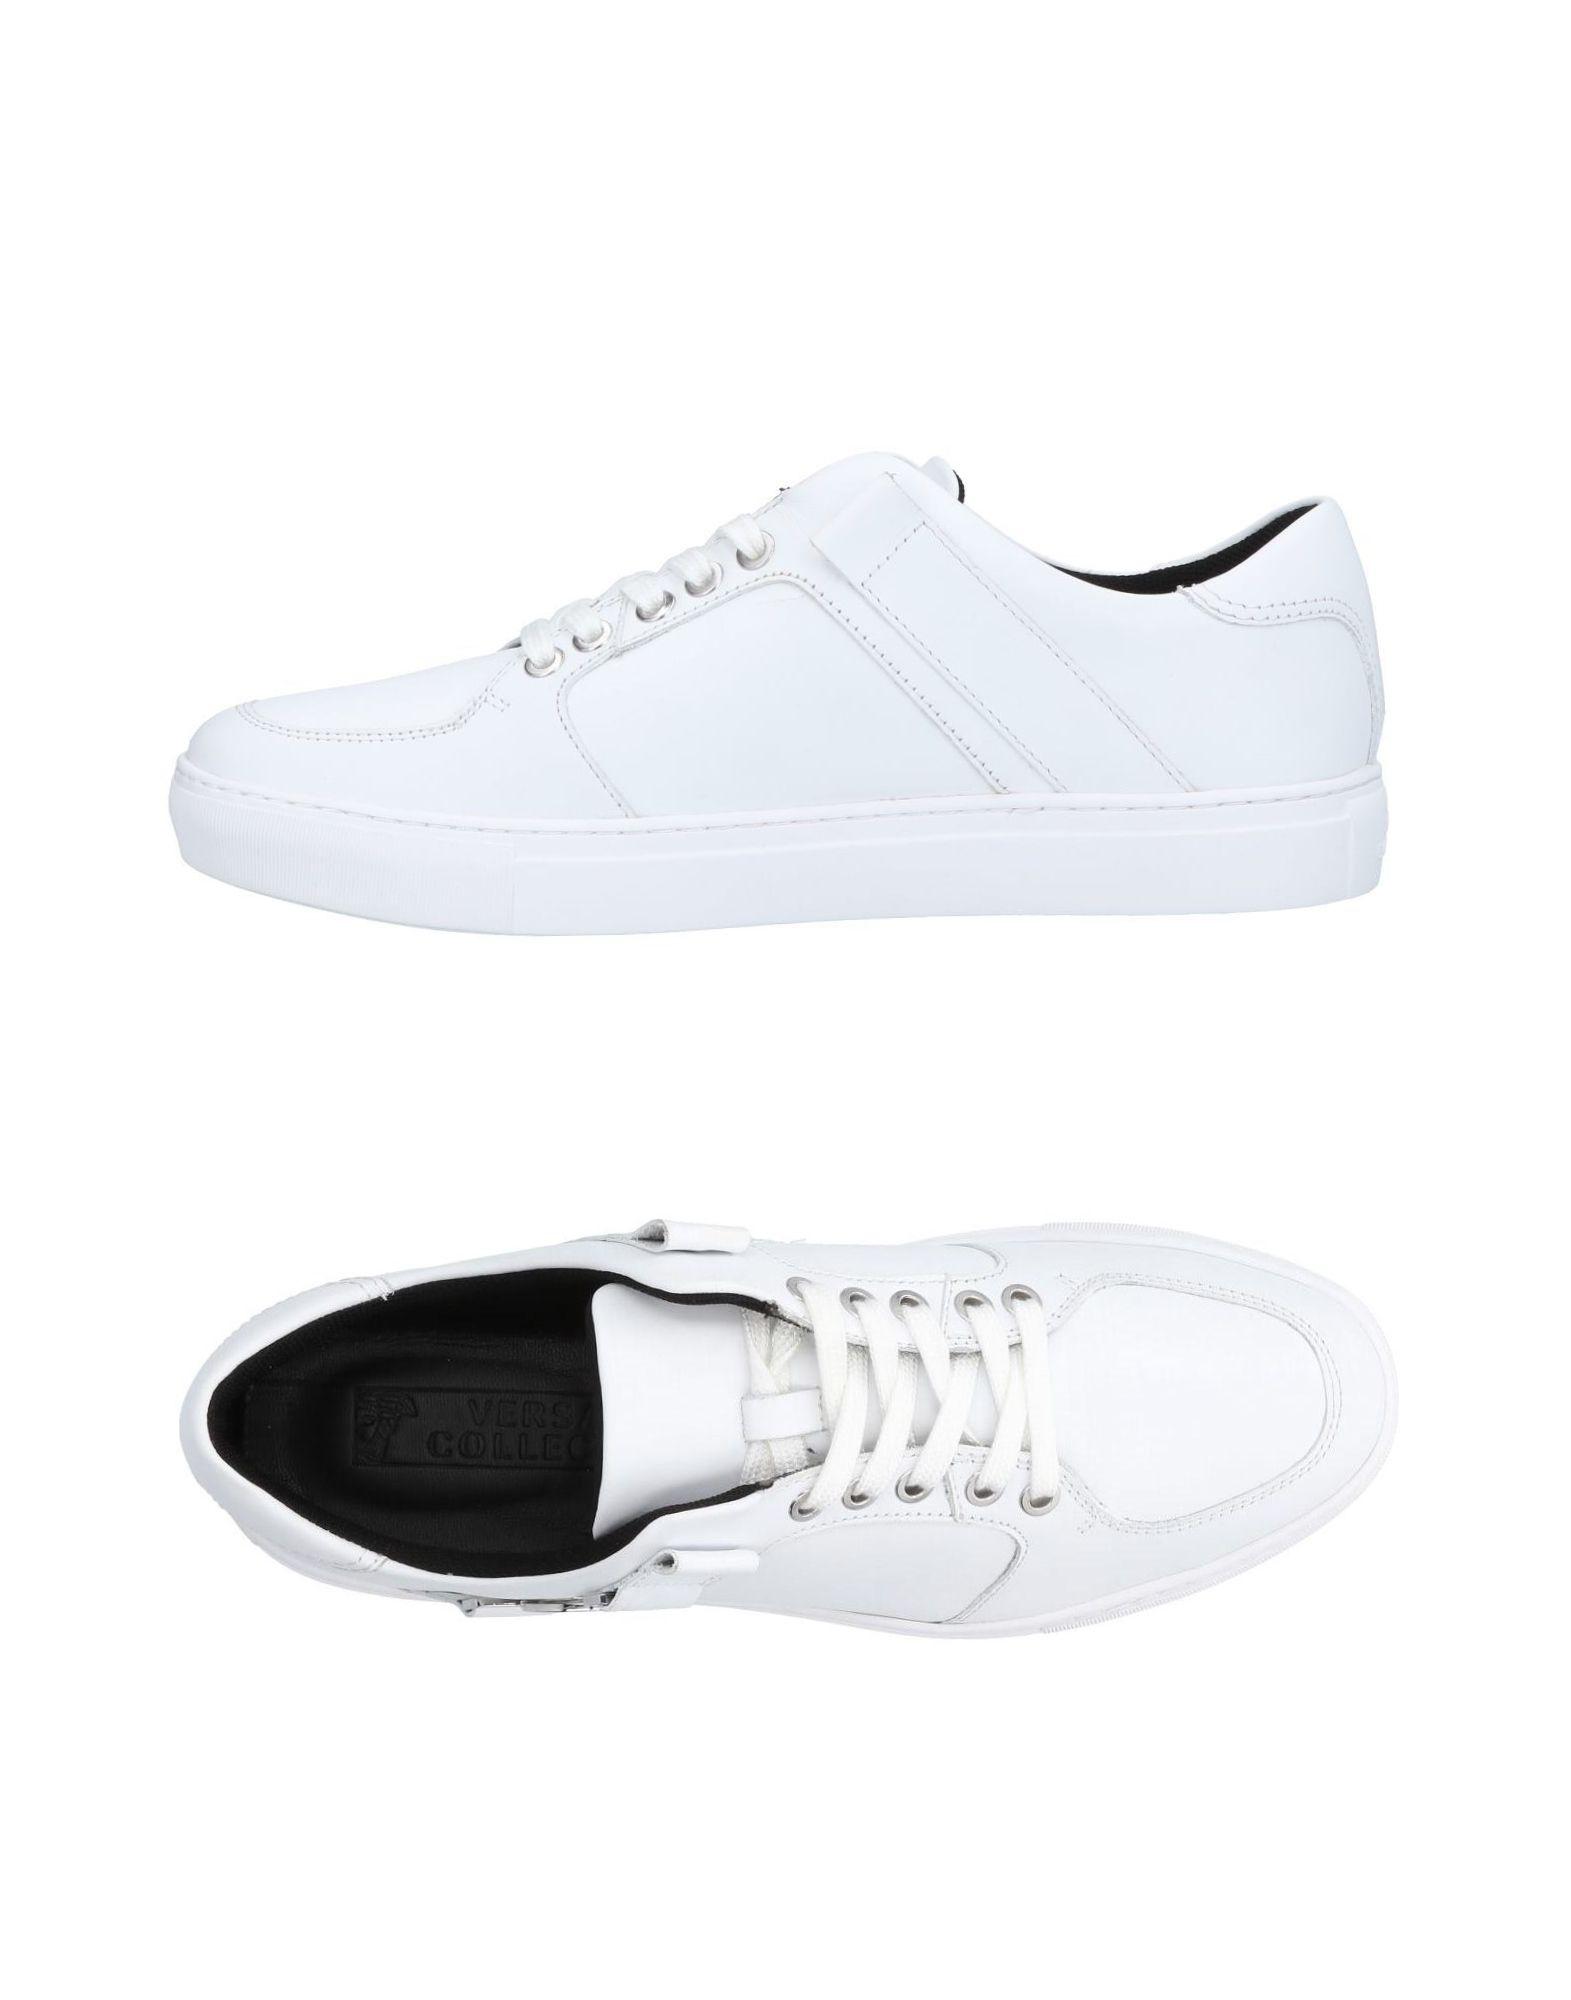 Versace Leather Low-tops & Sneakers in White for Men - Lyst